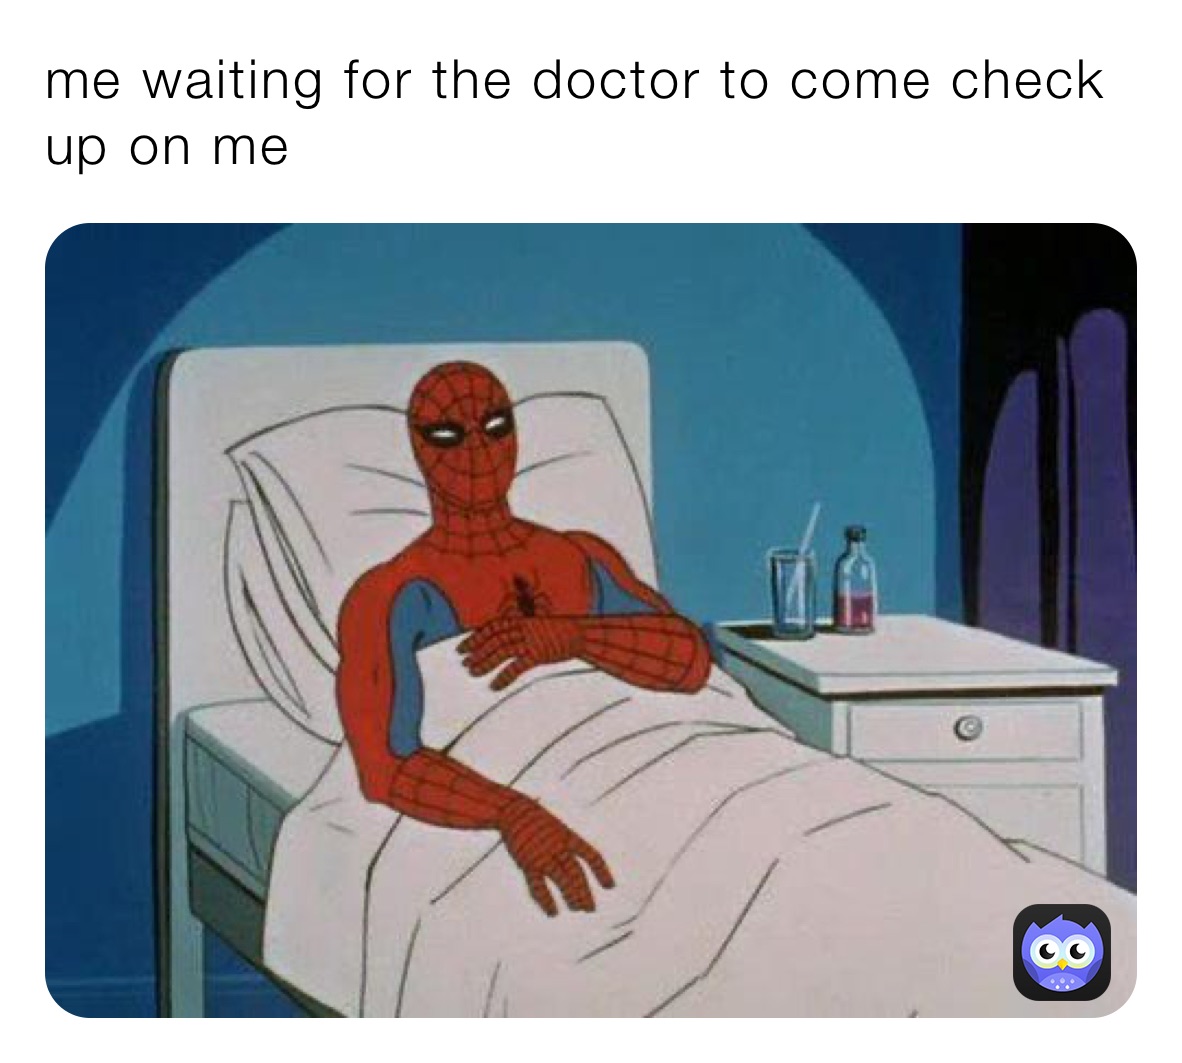 me waiting for the doctor to come check up on me